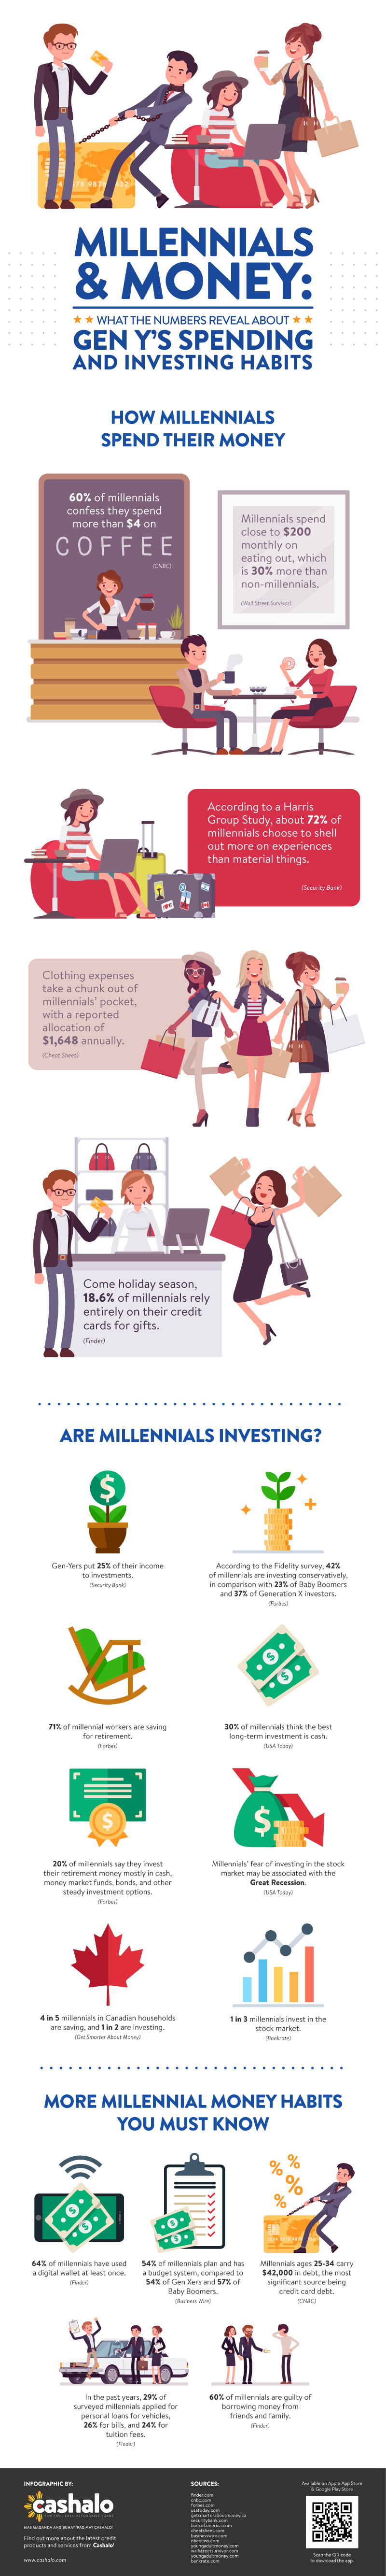 Millennials-Money-What-the-Numbers-Reveal-About-Gen-Y-Spending-and-Investing-Habits